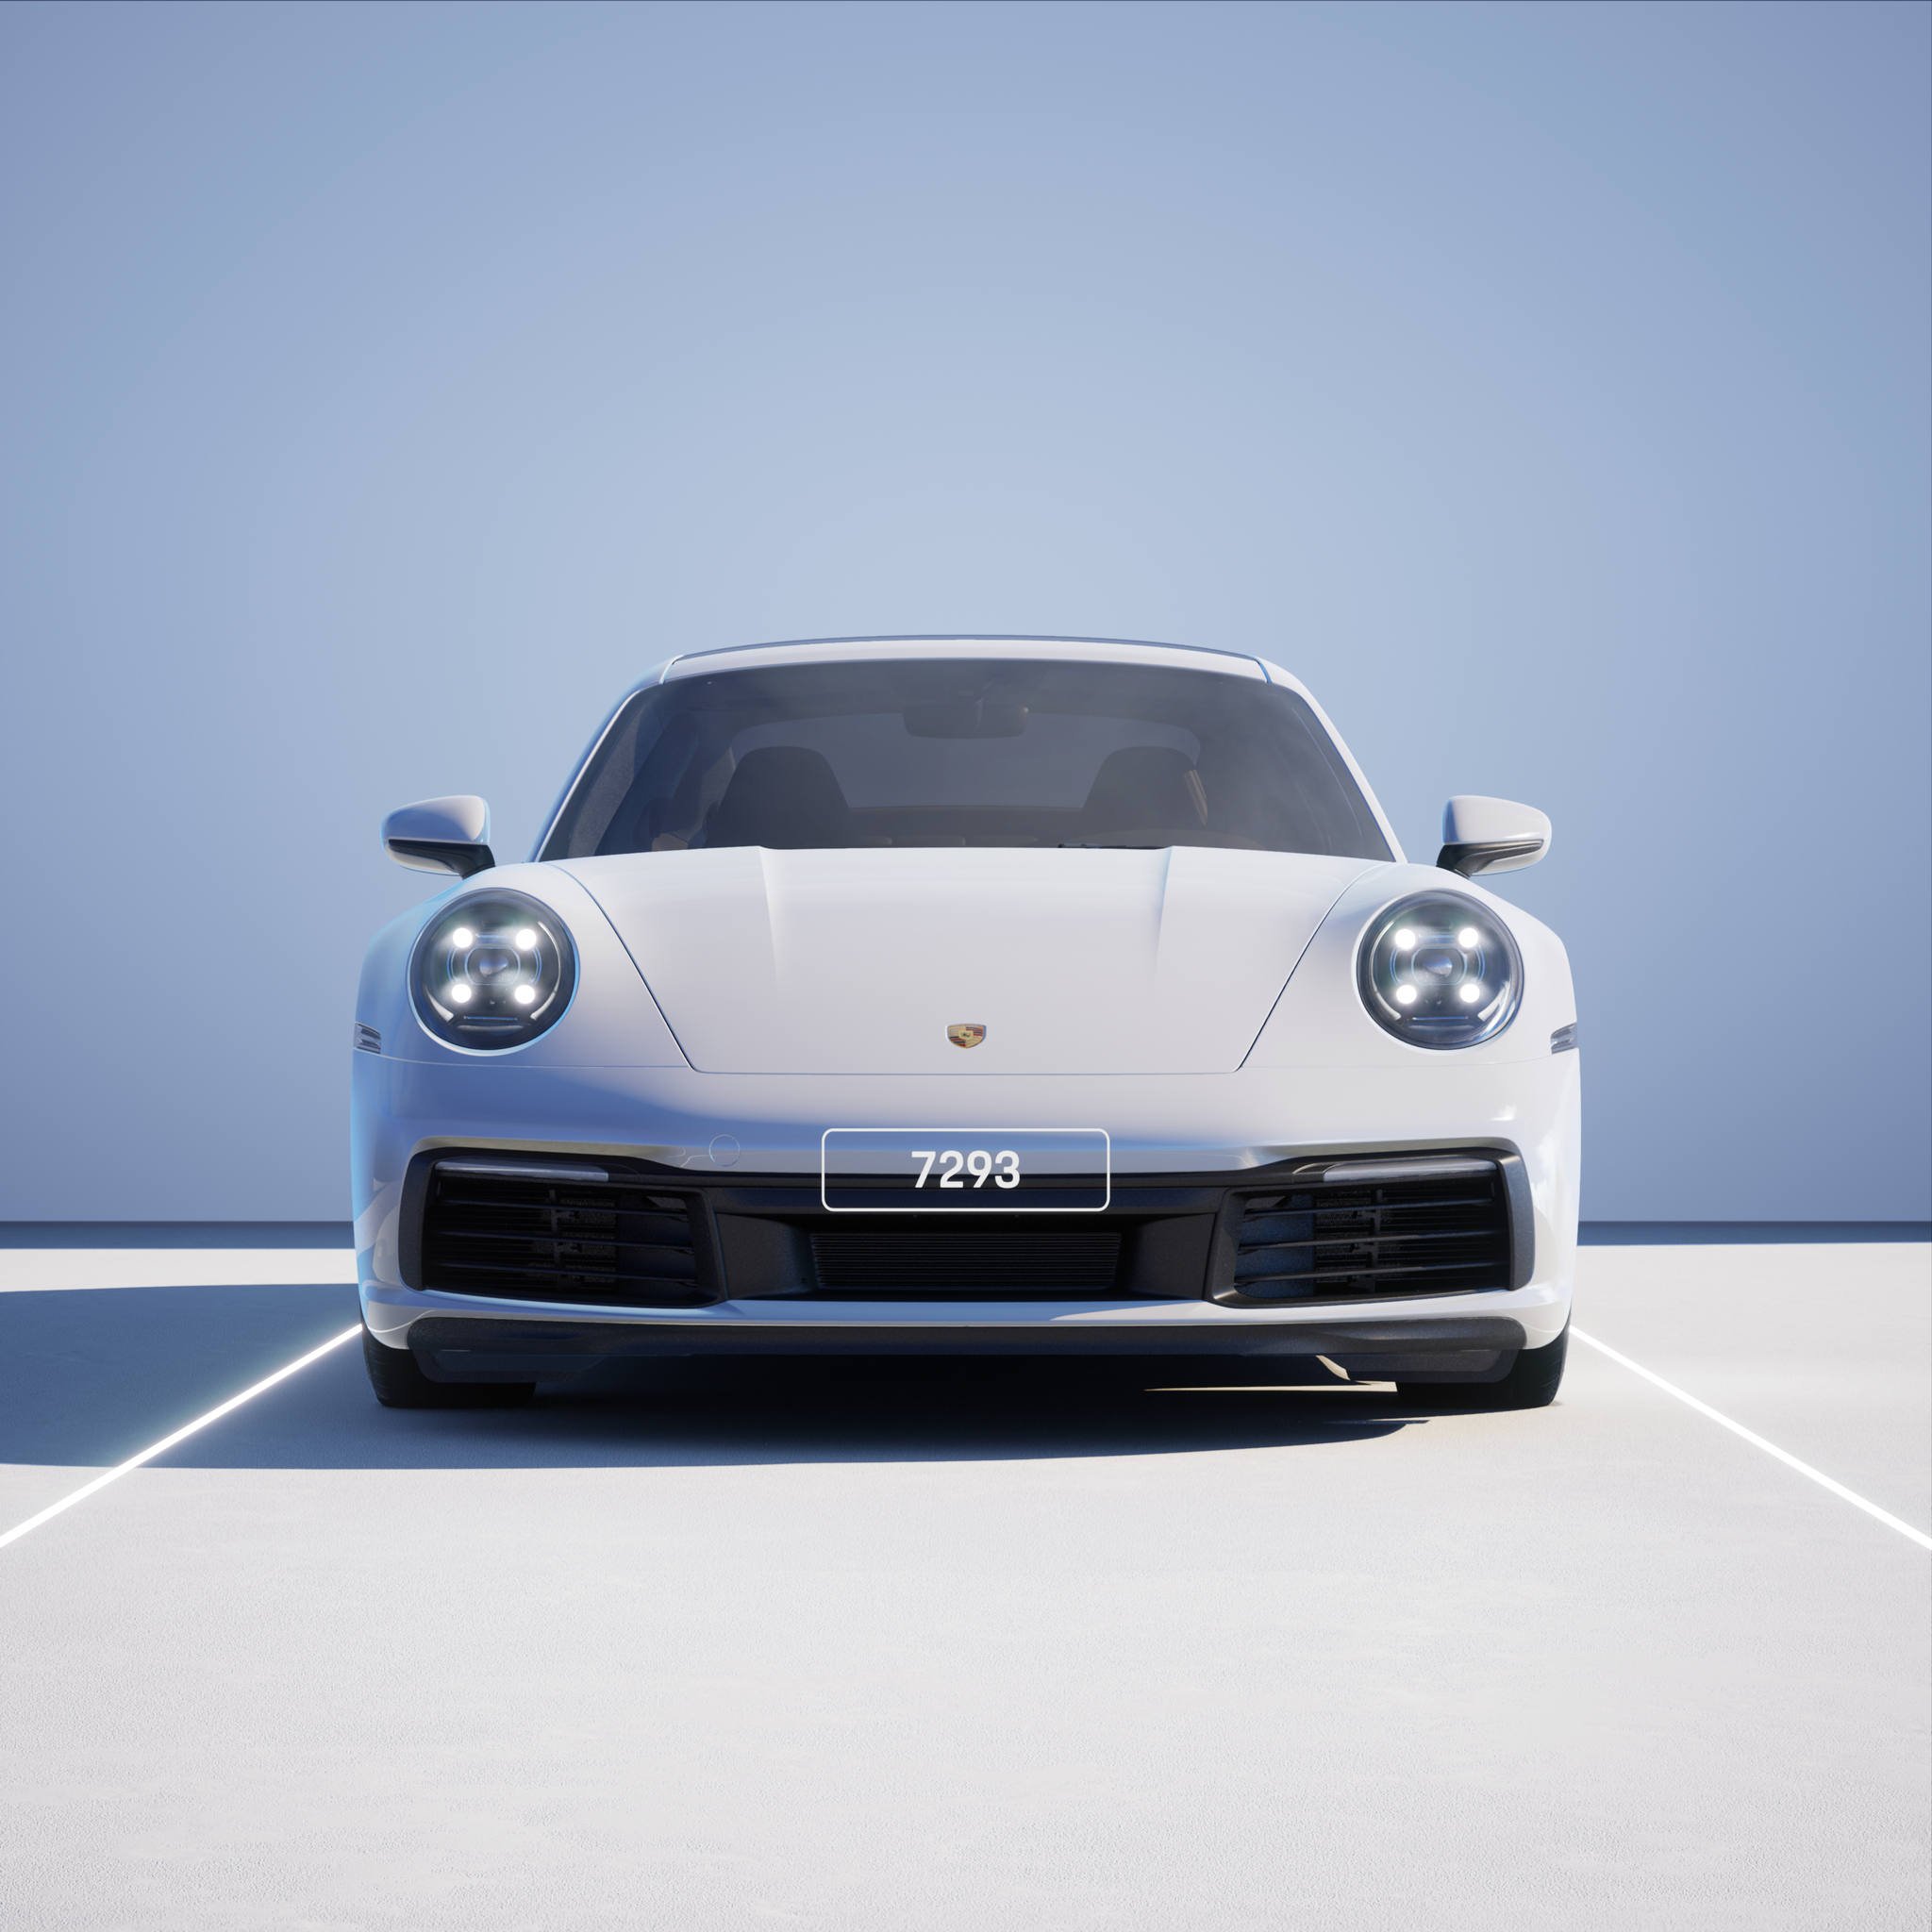 The PORSCHΞ 911 7293 image in phase